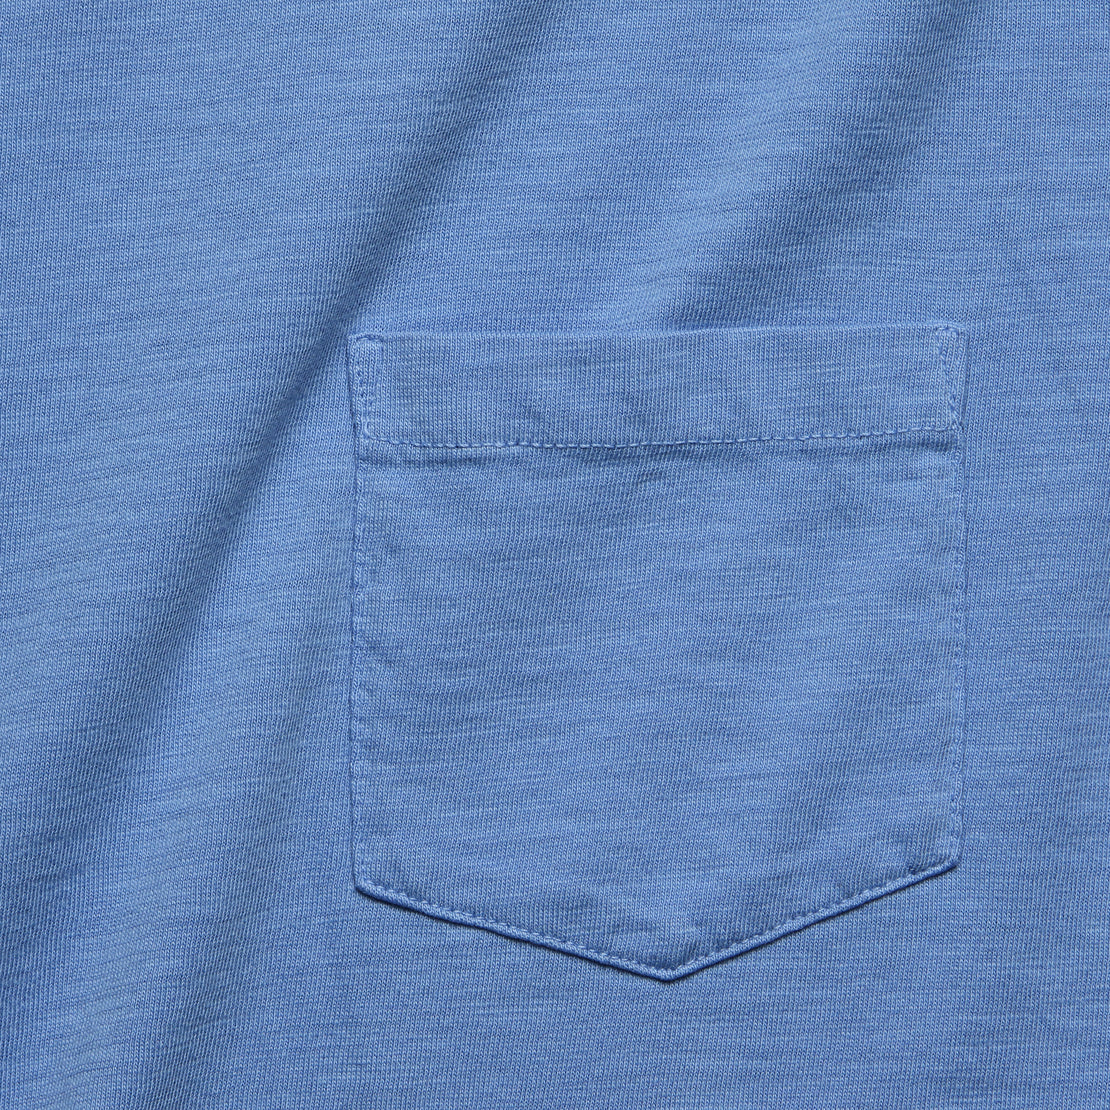 Garment Dyed Pocket Tee - Azure - Faherty - STAG Provisions - Tops - S/S Tee